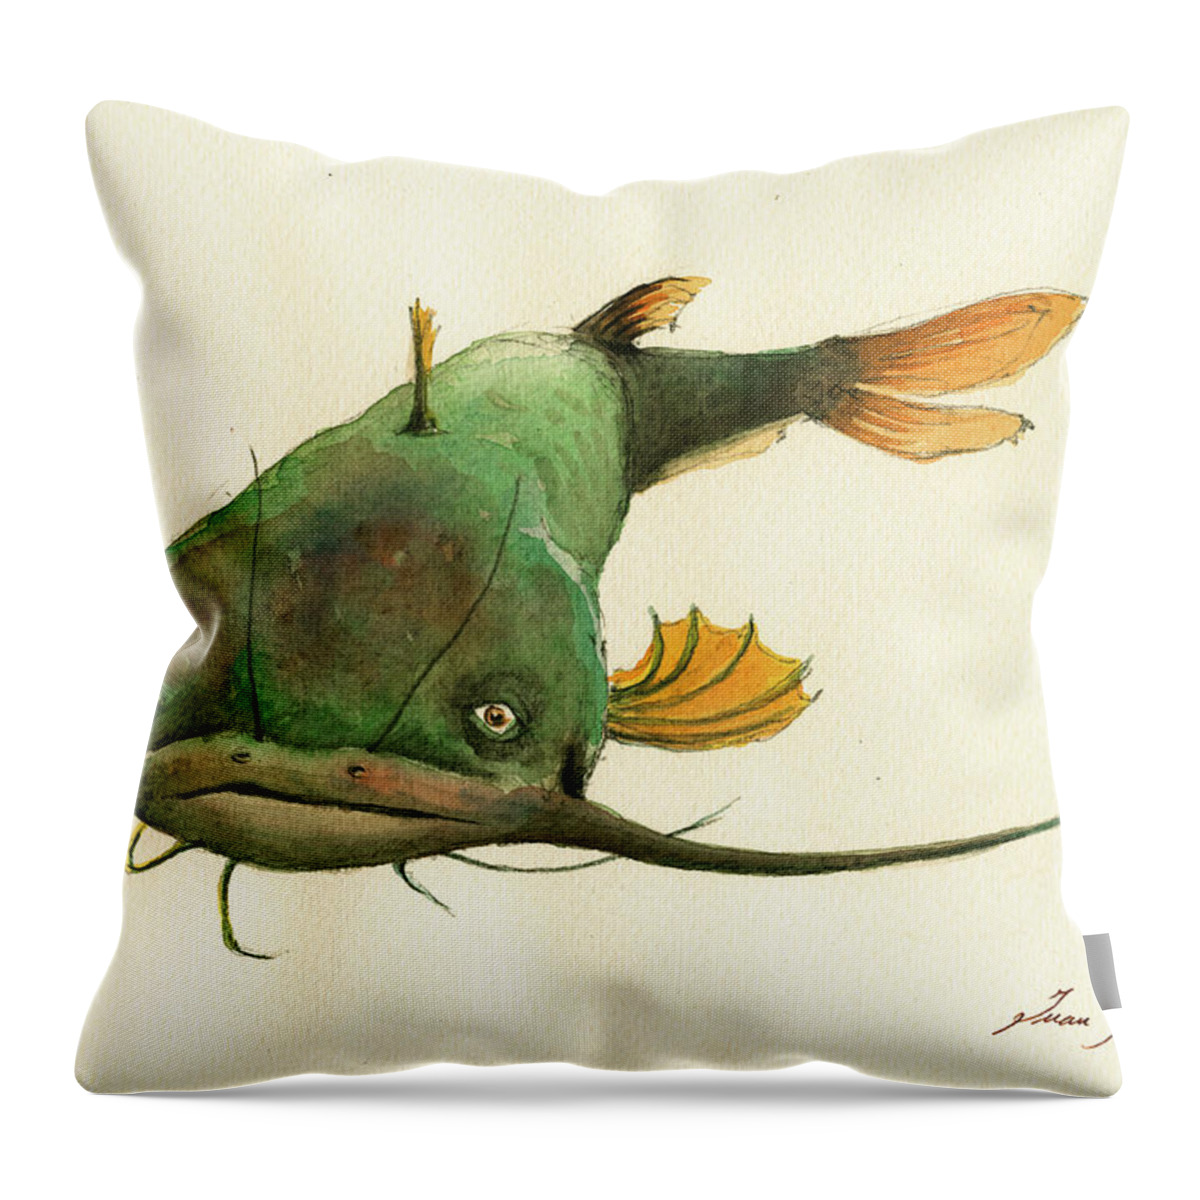 Channel Catfish Throw Pillow featuring the painting Channel Catfish fish animal watercolor painting #1 by Juan Bosco